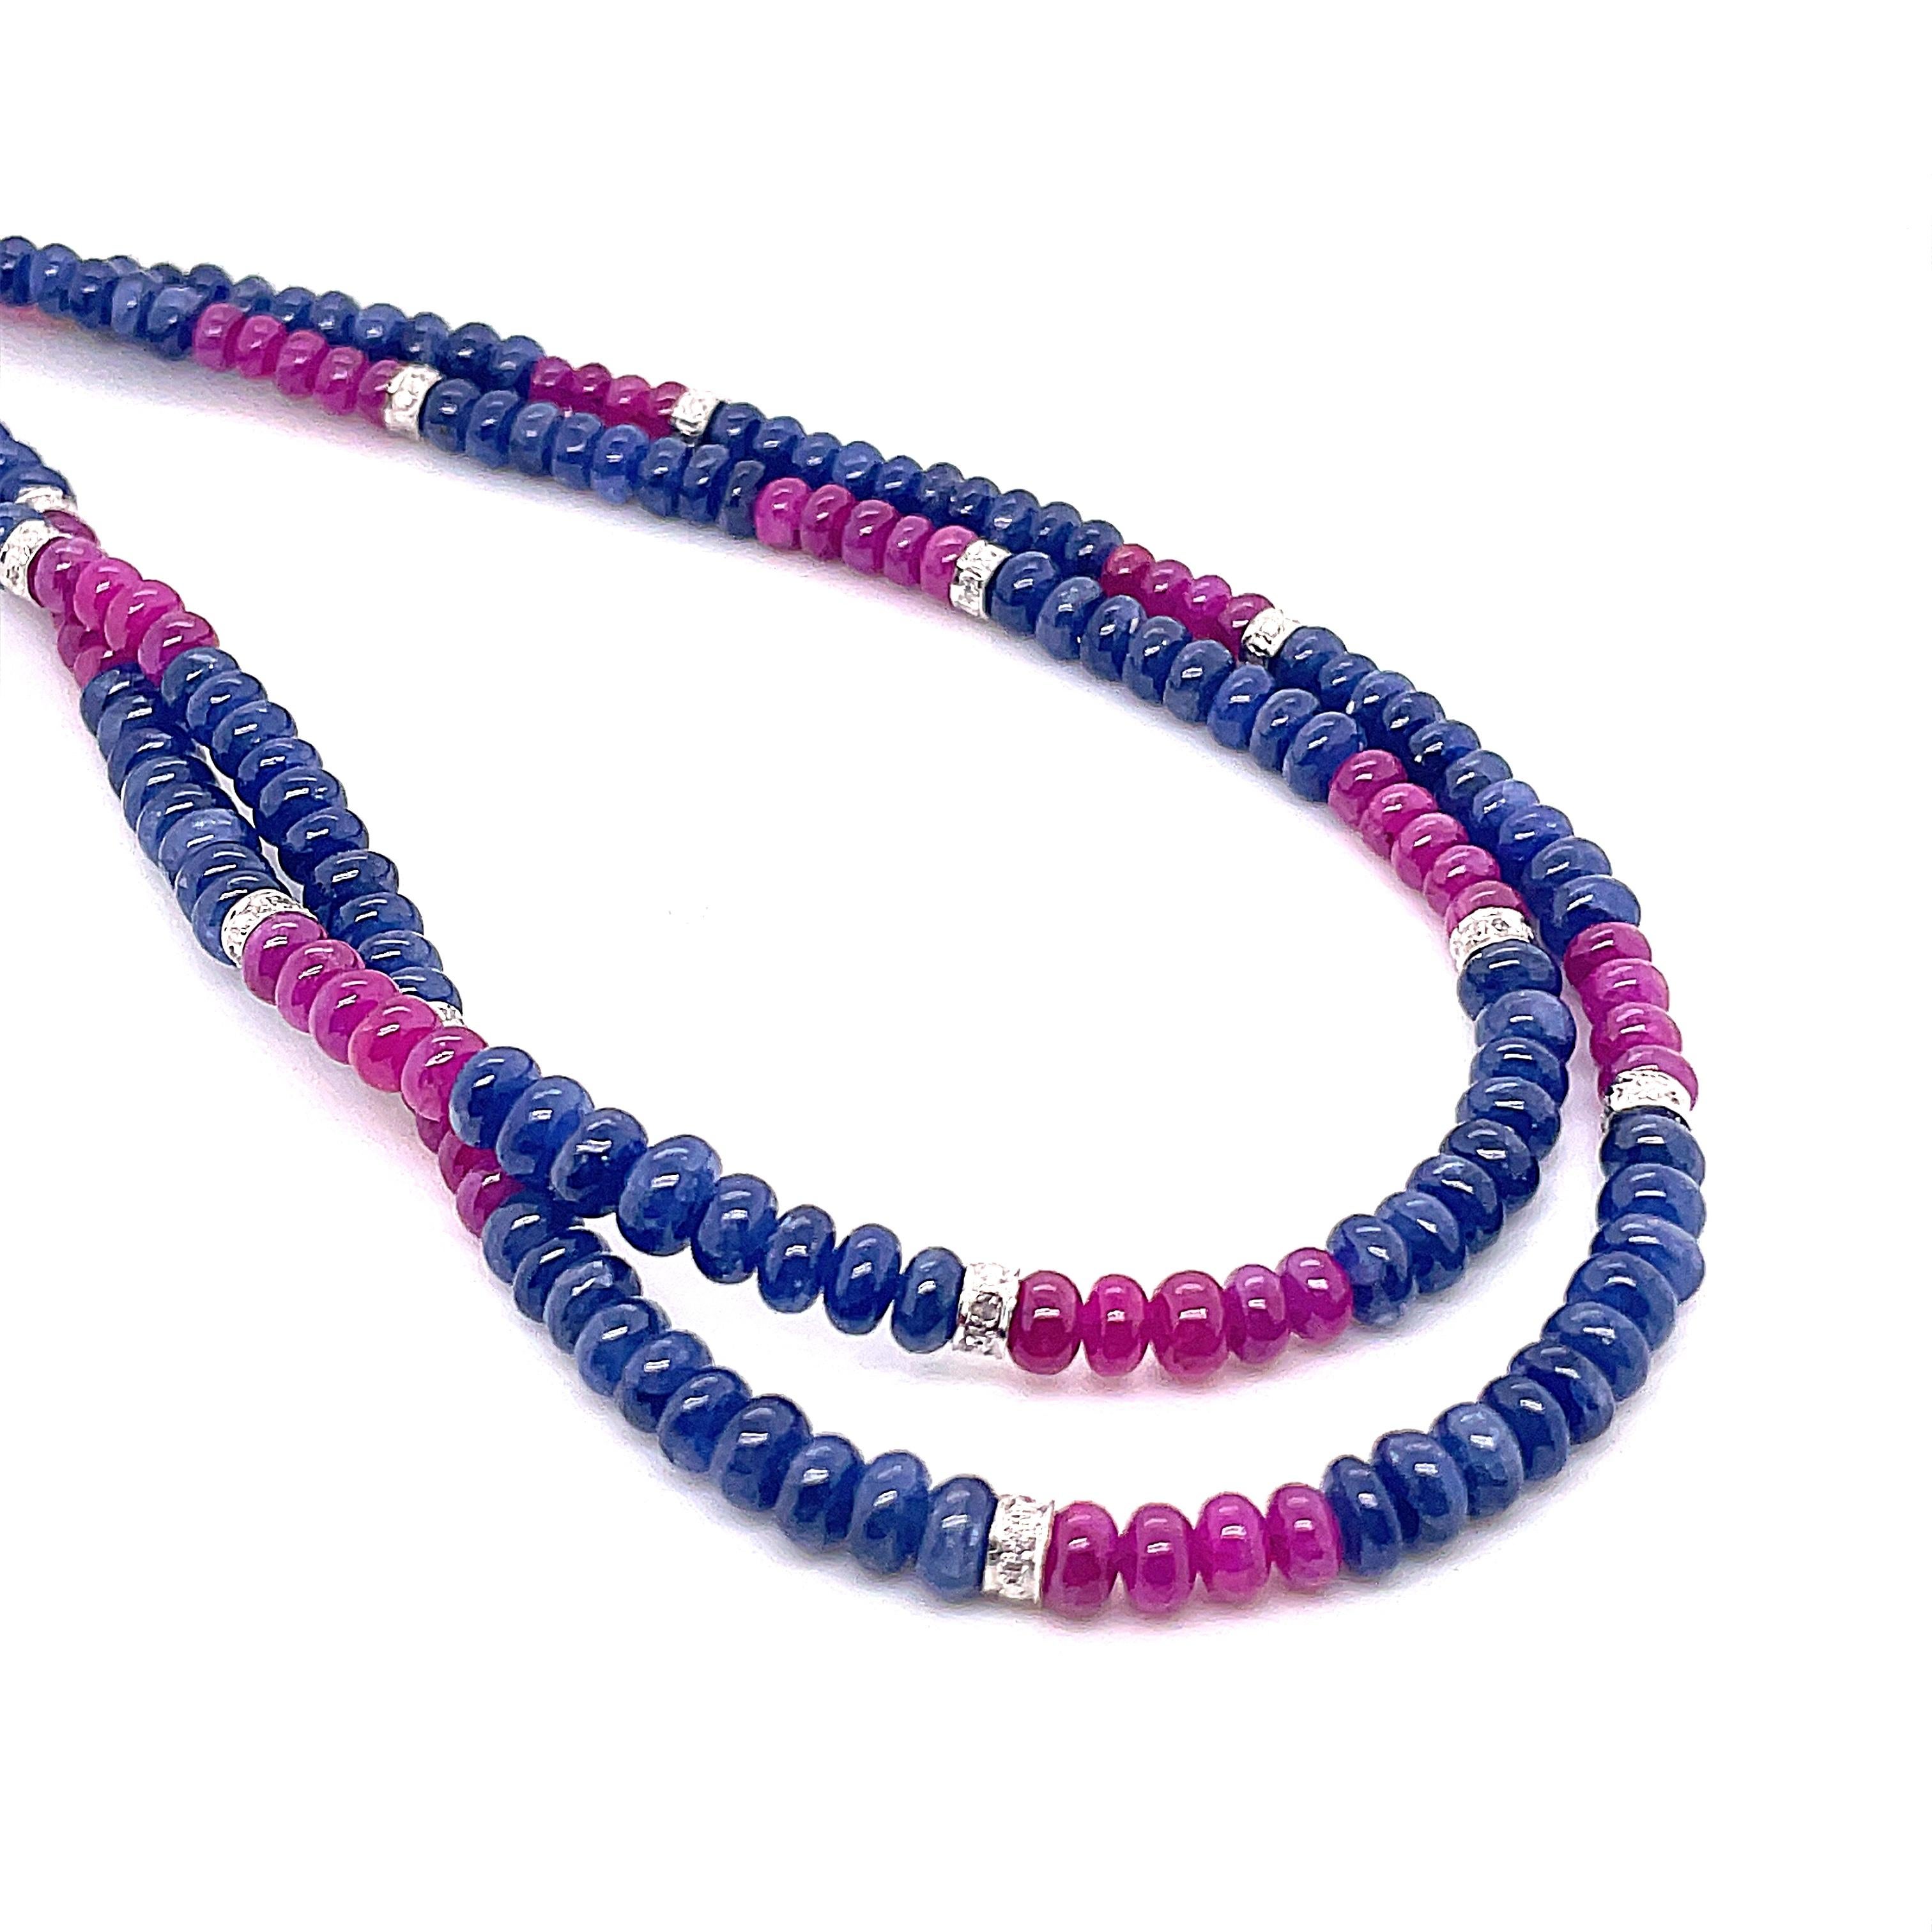 Burmese Ruby and Sapphire Beads White Diamond Gold Necklace For Sale 2